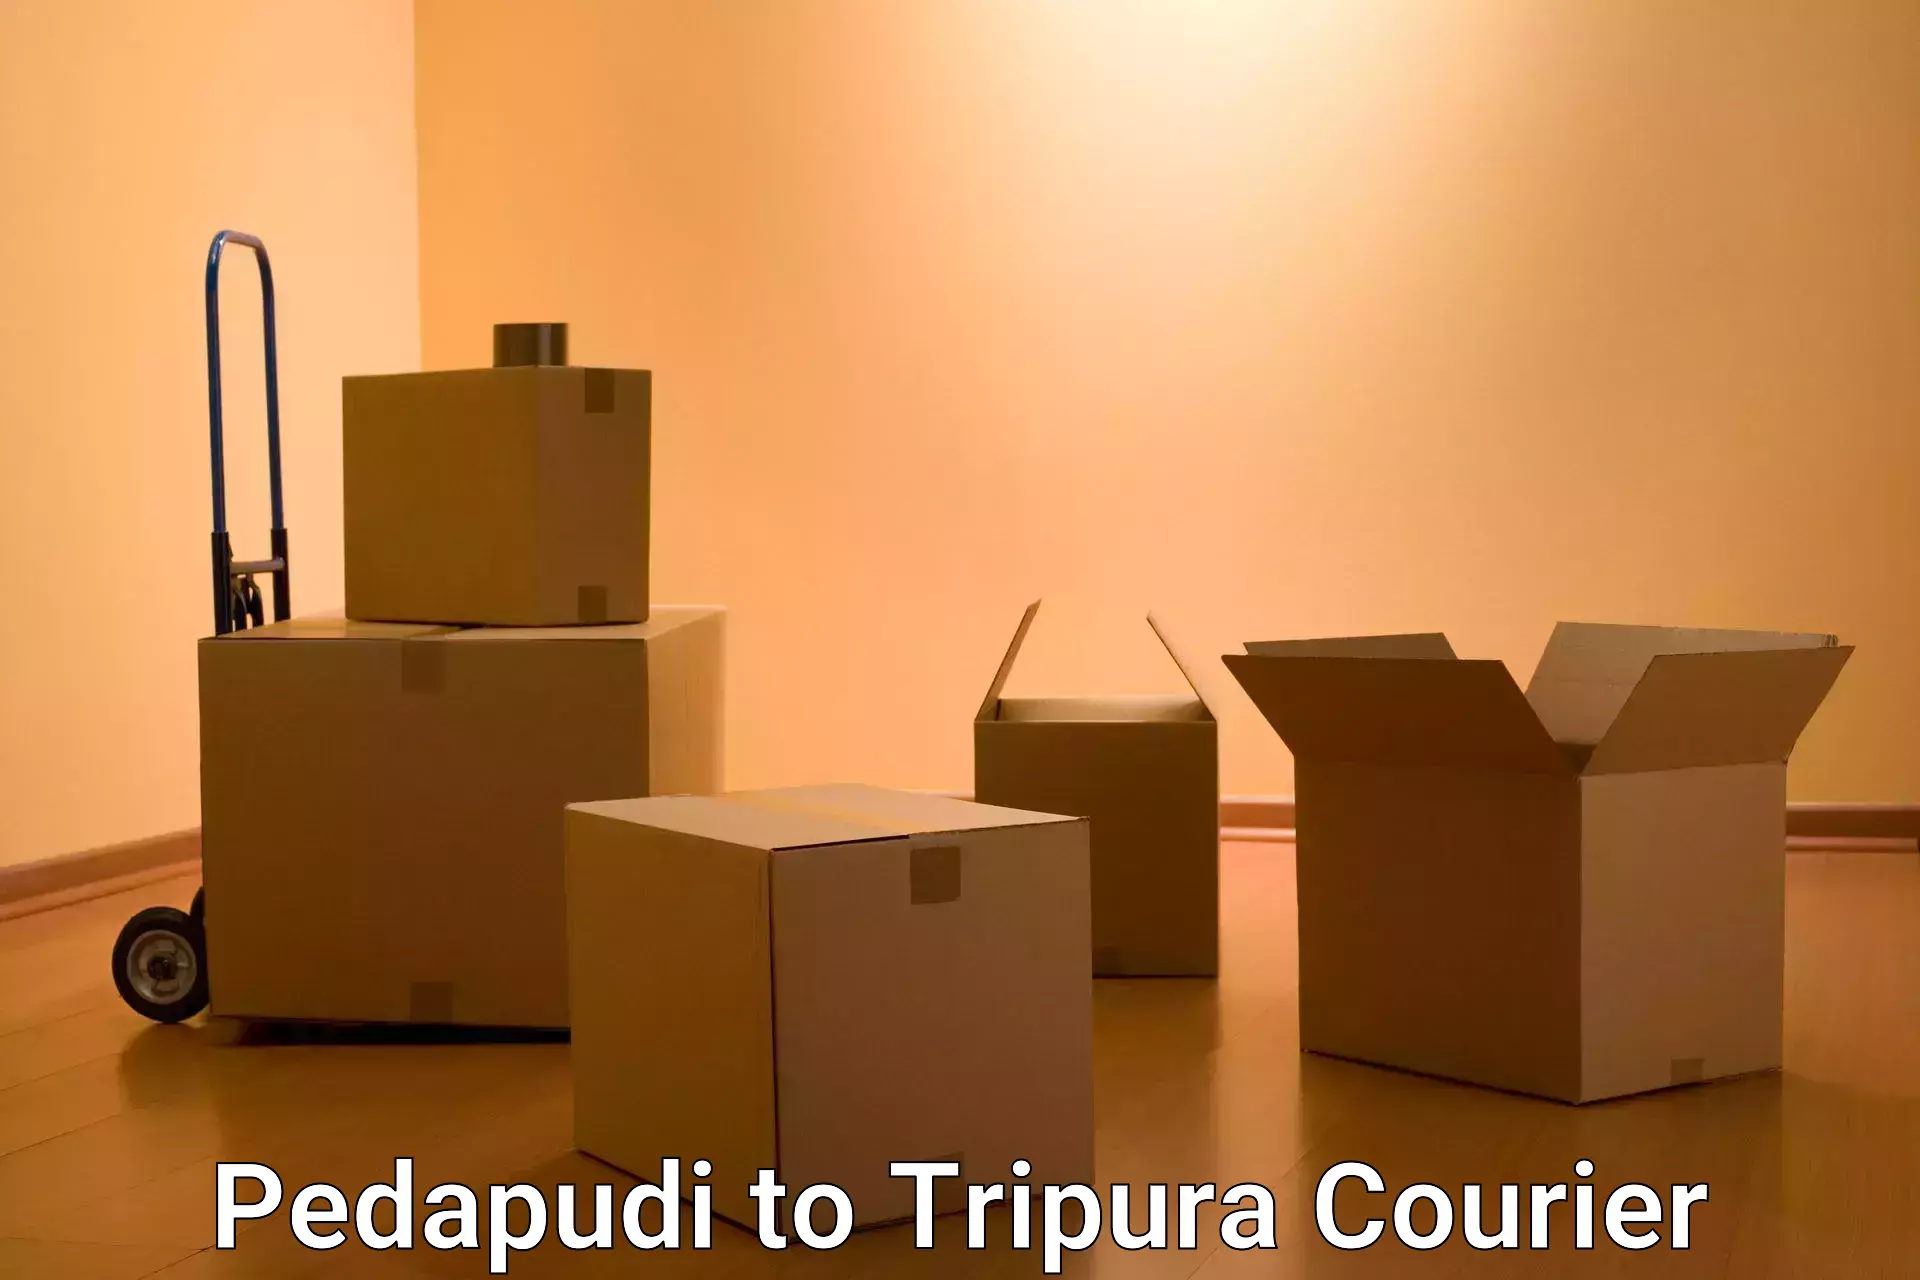 Express delivery network Pedapudi to Tripura